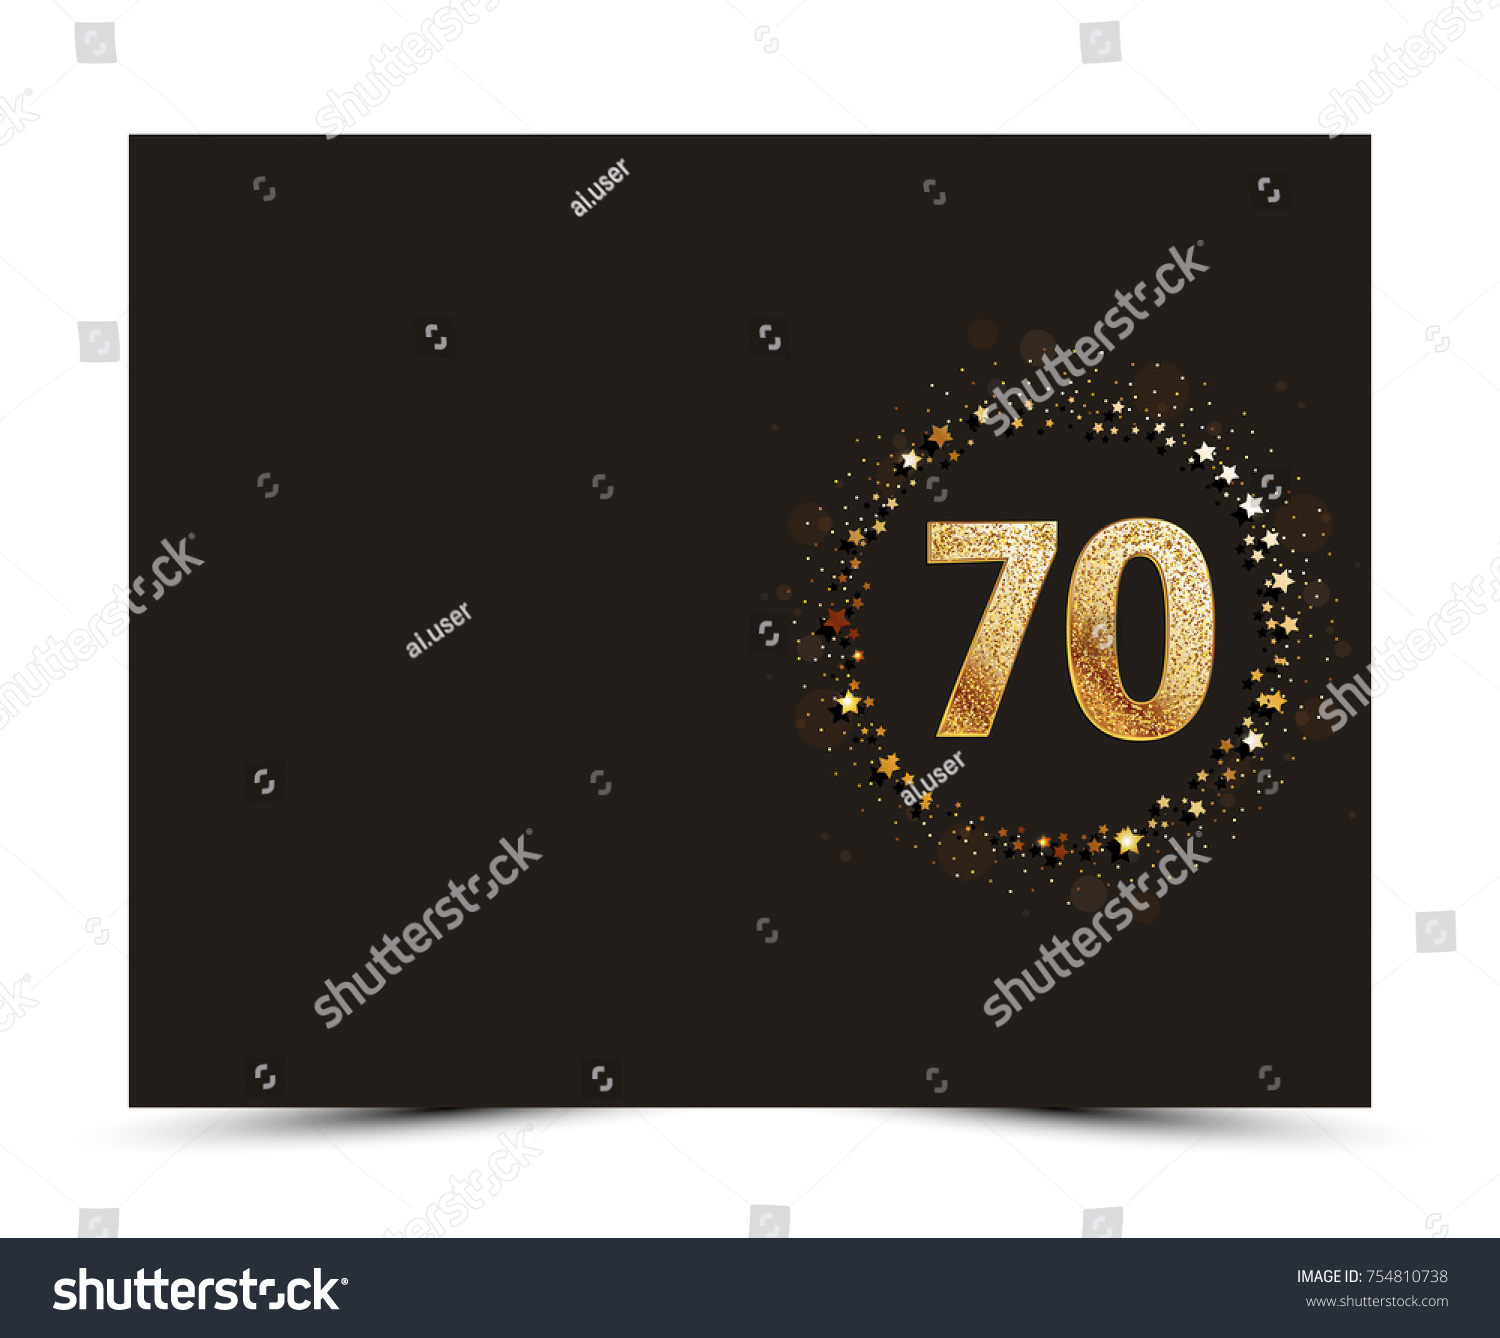 SVG of 70 years anniversary decorated greeting / invitation card template with gold elements. svg